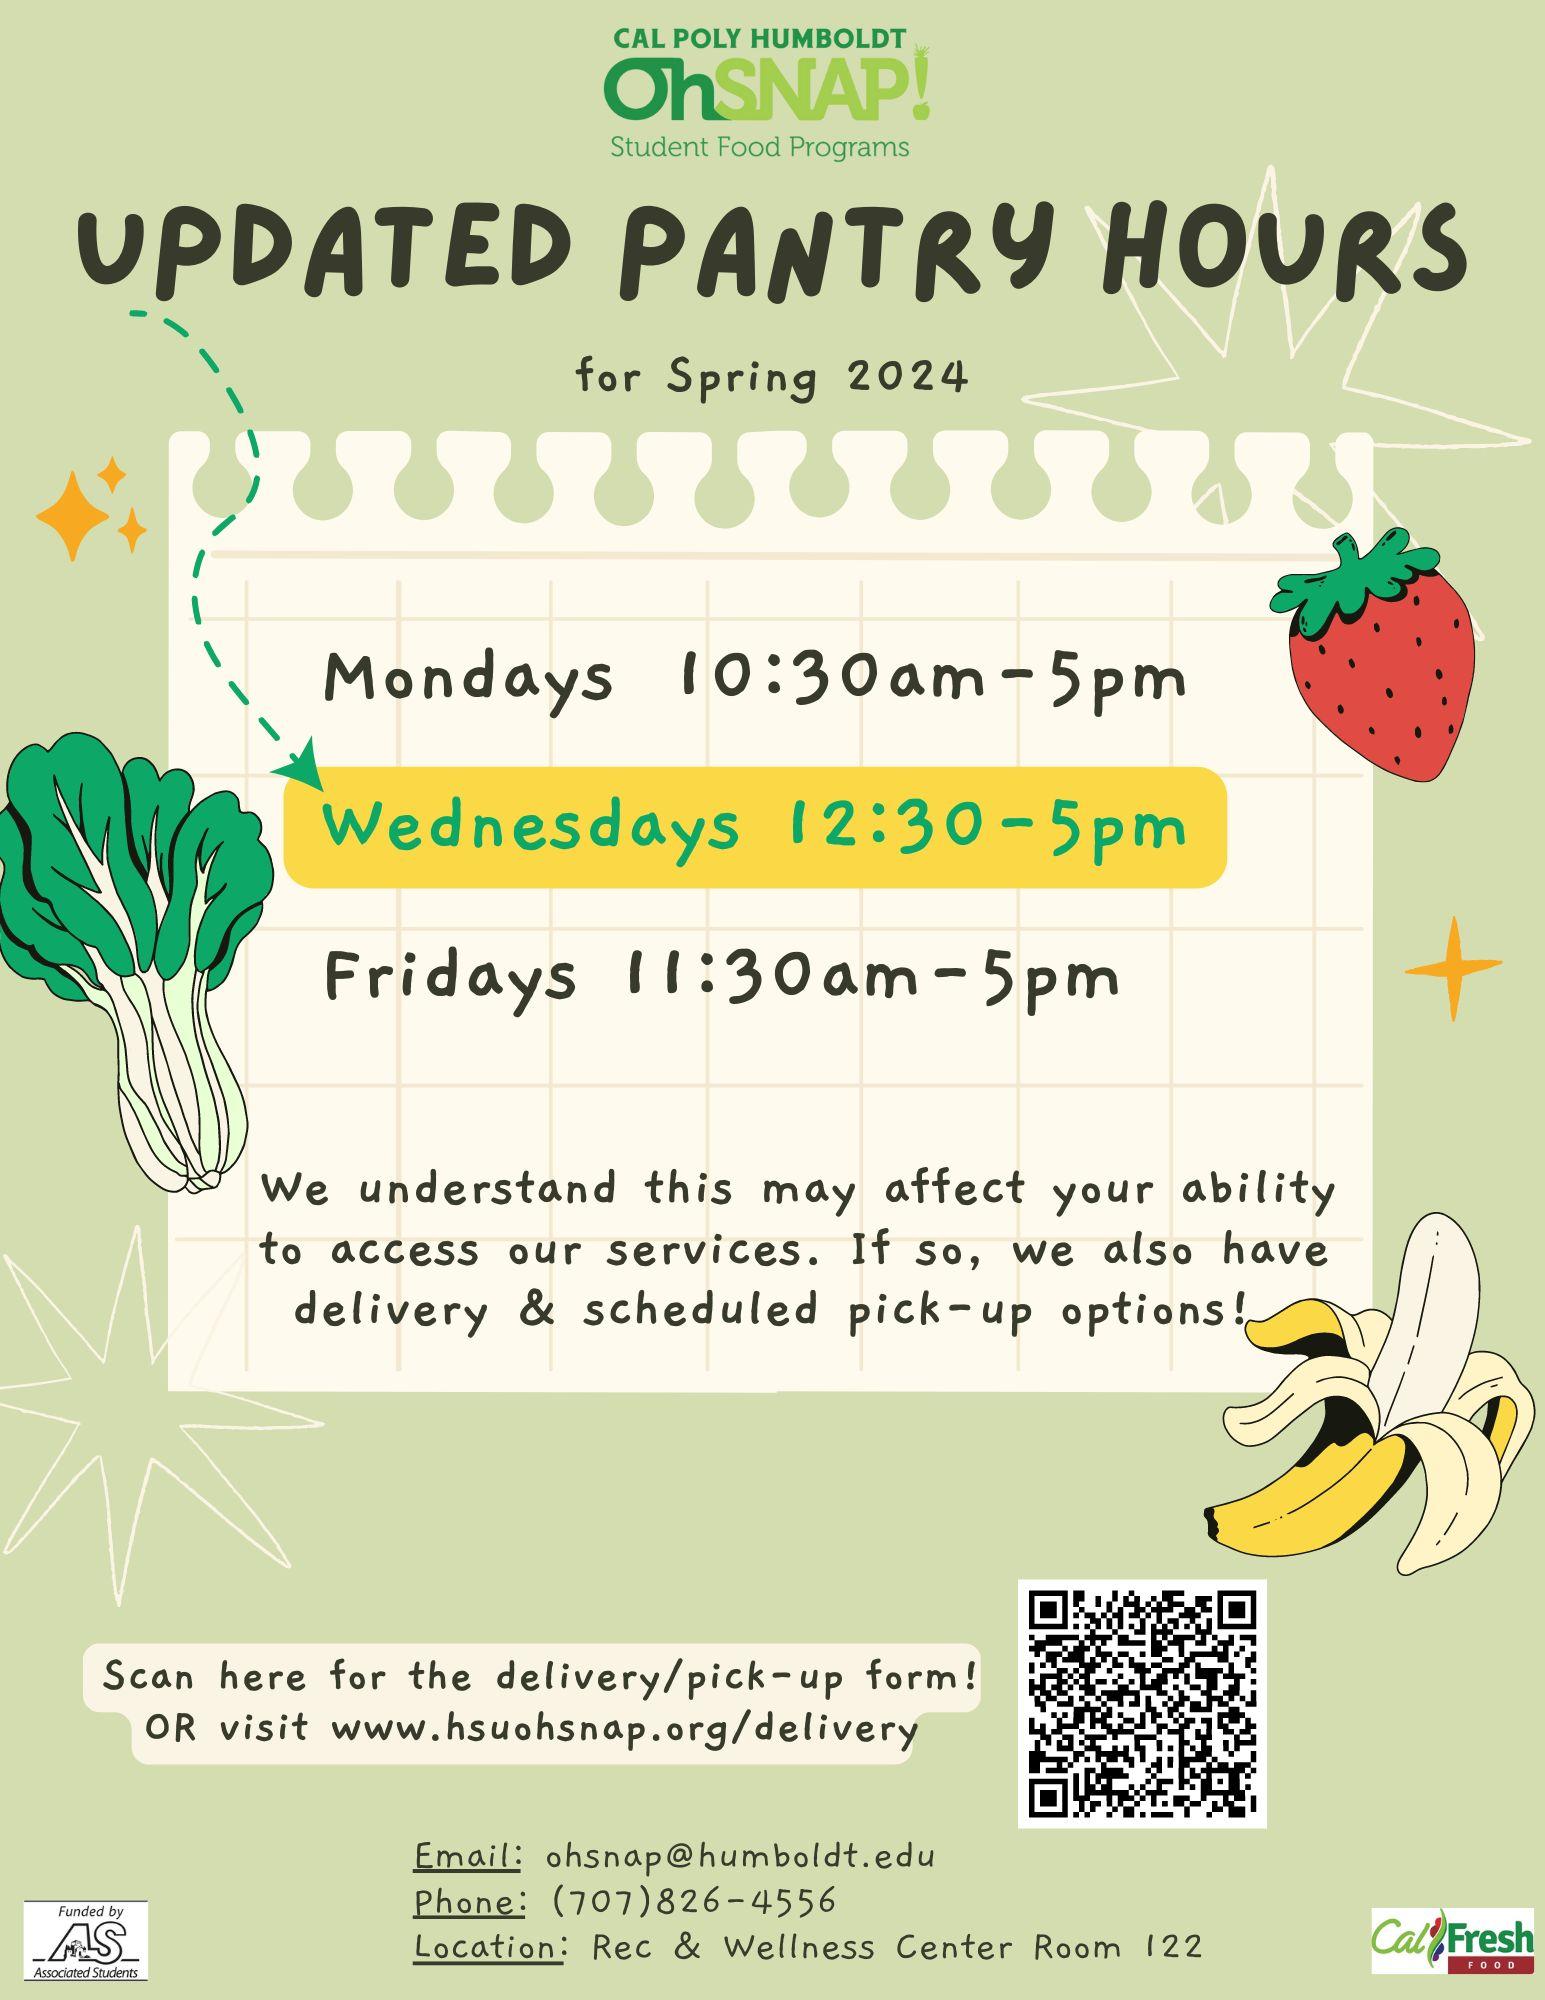 Oh Snap Updated Pantry Hours for Spring 2024. Mondays 10:30am-5pm. Wednesdays 12:30-5pm. Fridays 11:30am-5pm. We understand this may affect your ability to access our services. If so, we also have delivery and scheduled pick-up options!